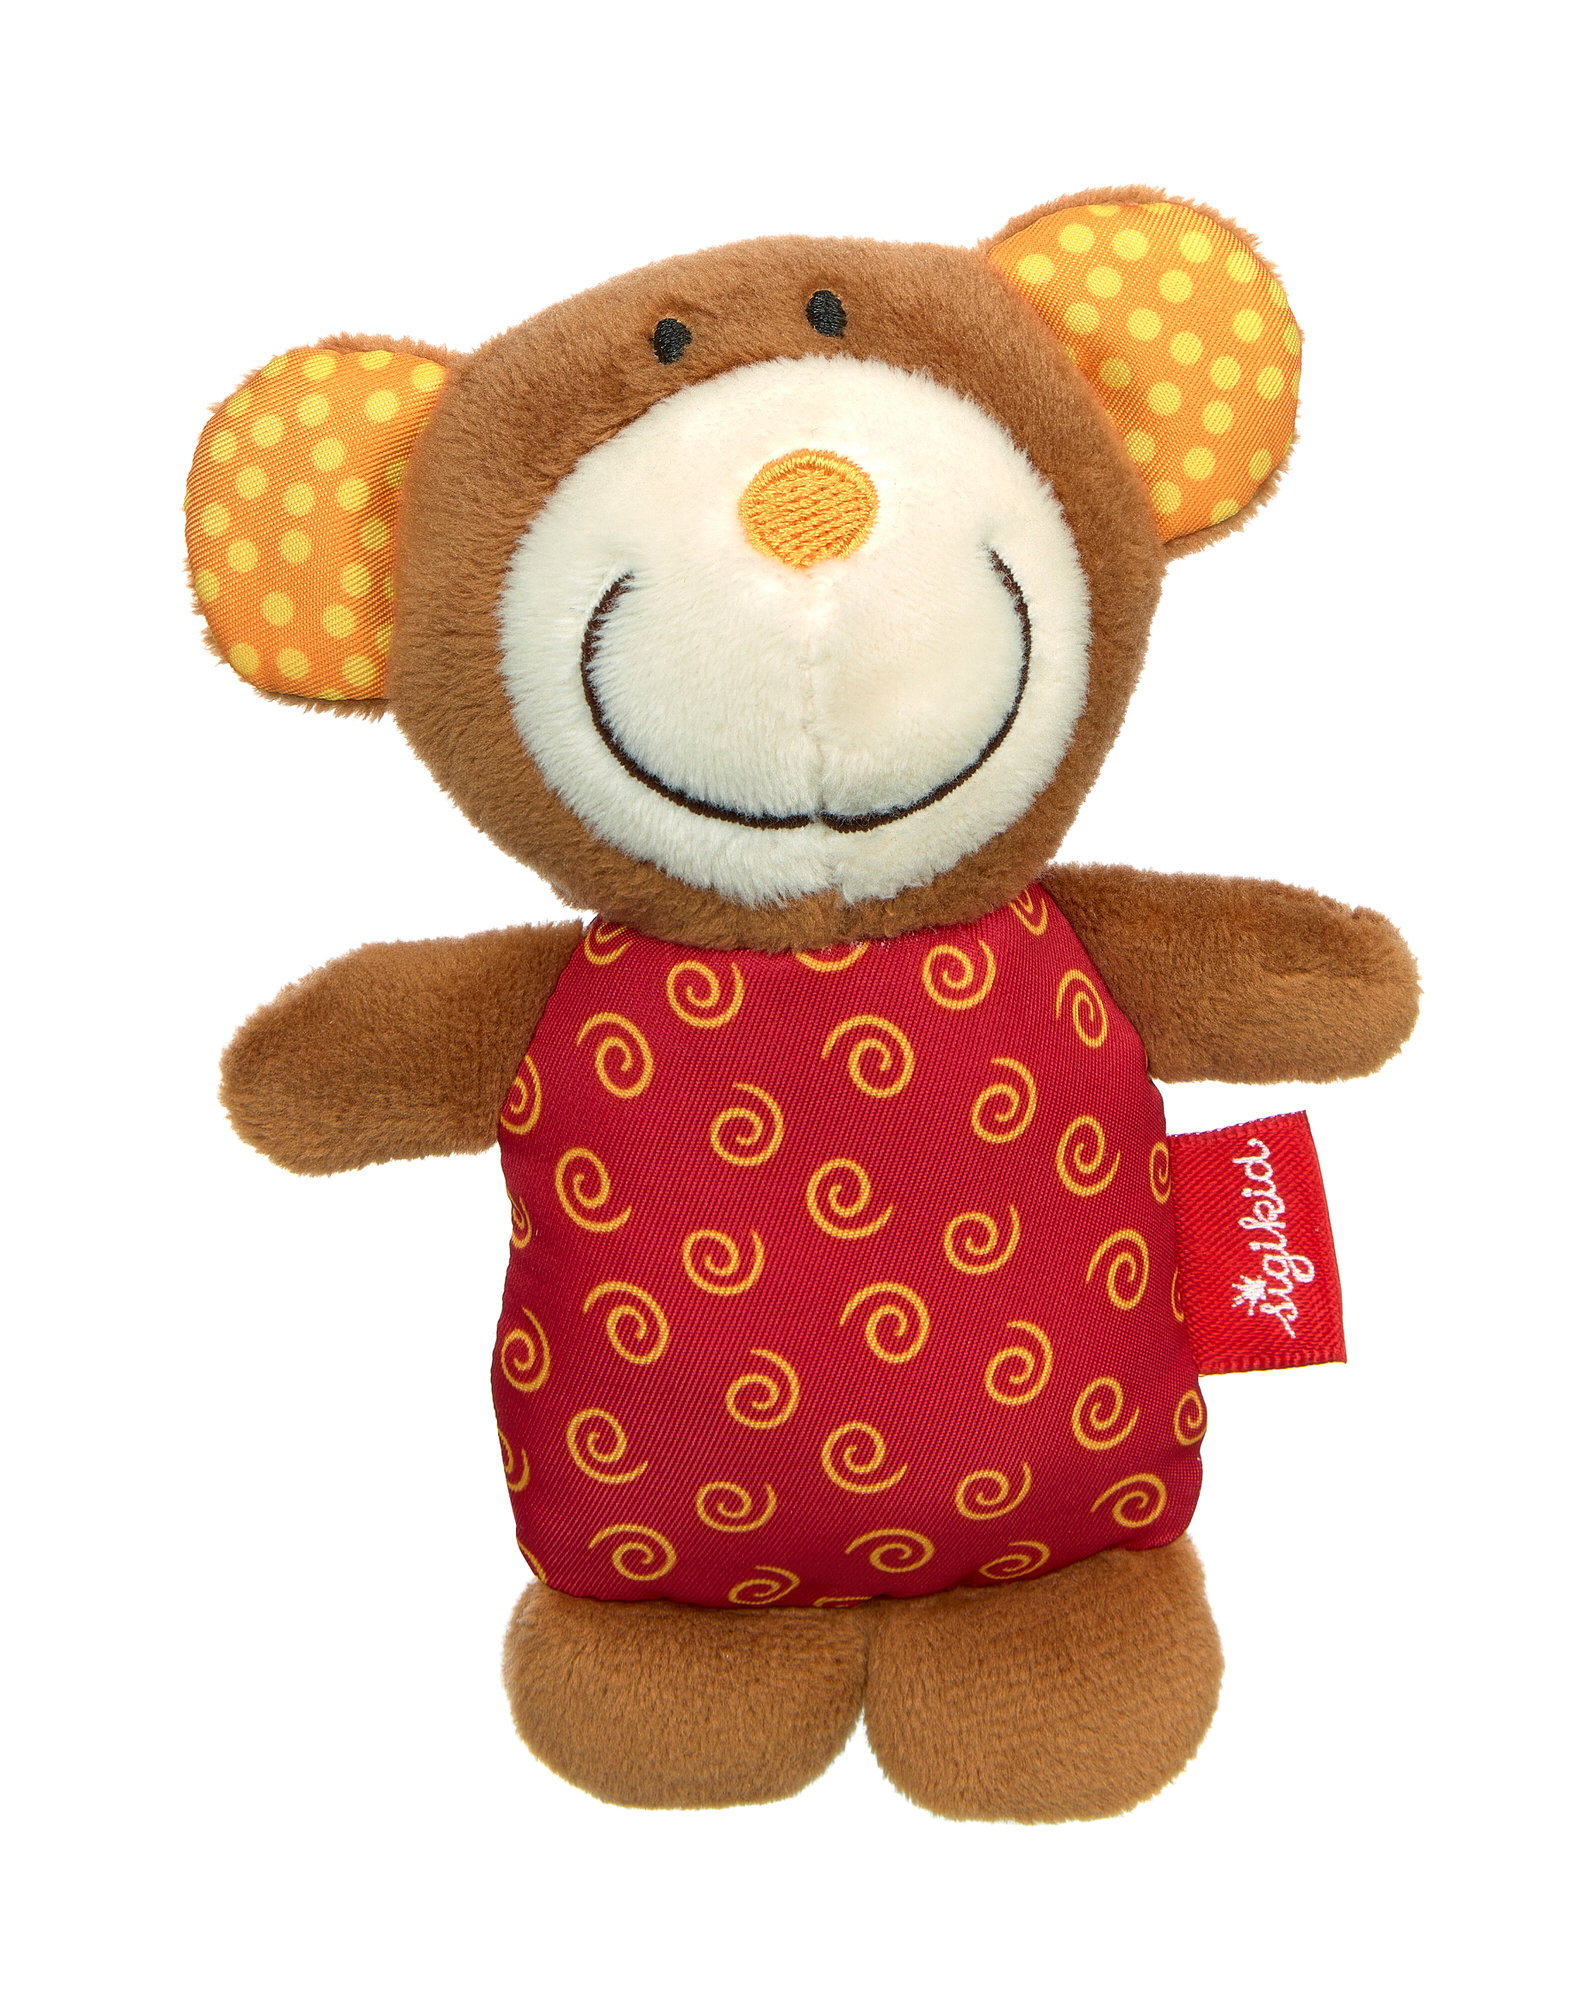 Cute teddy soft toy rattle for babies